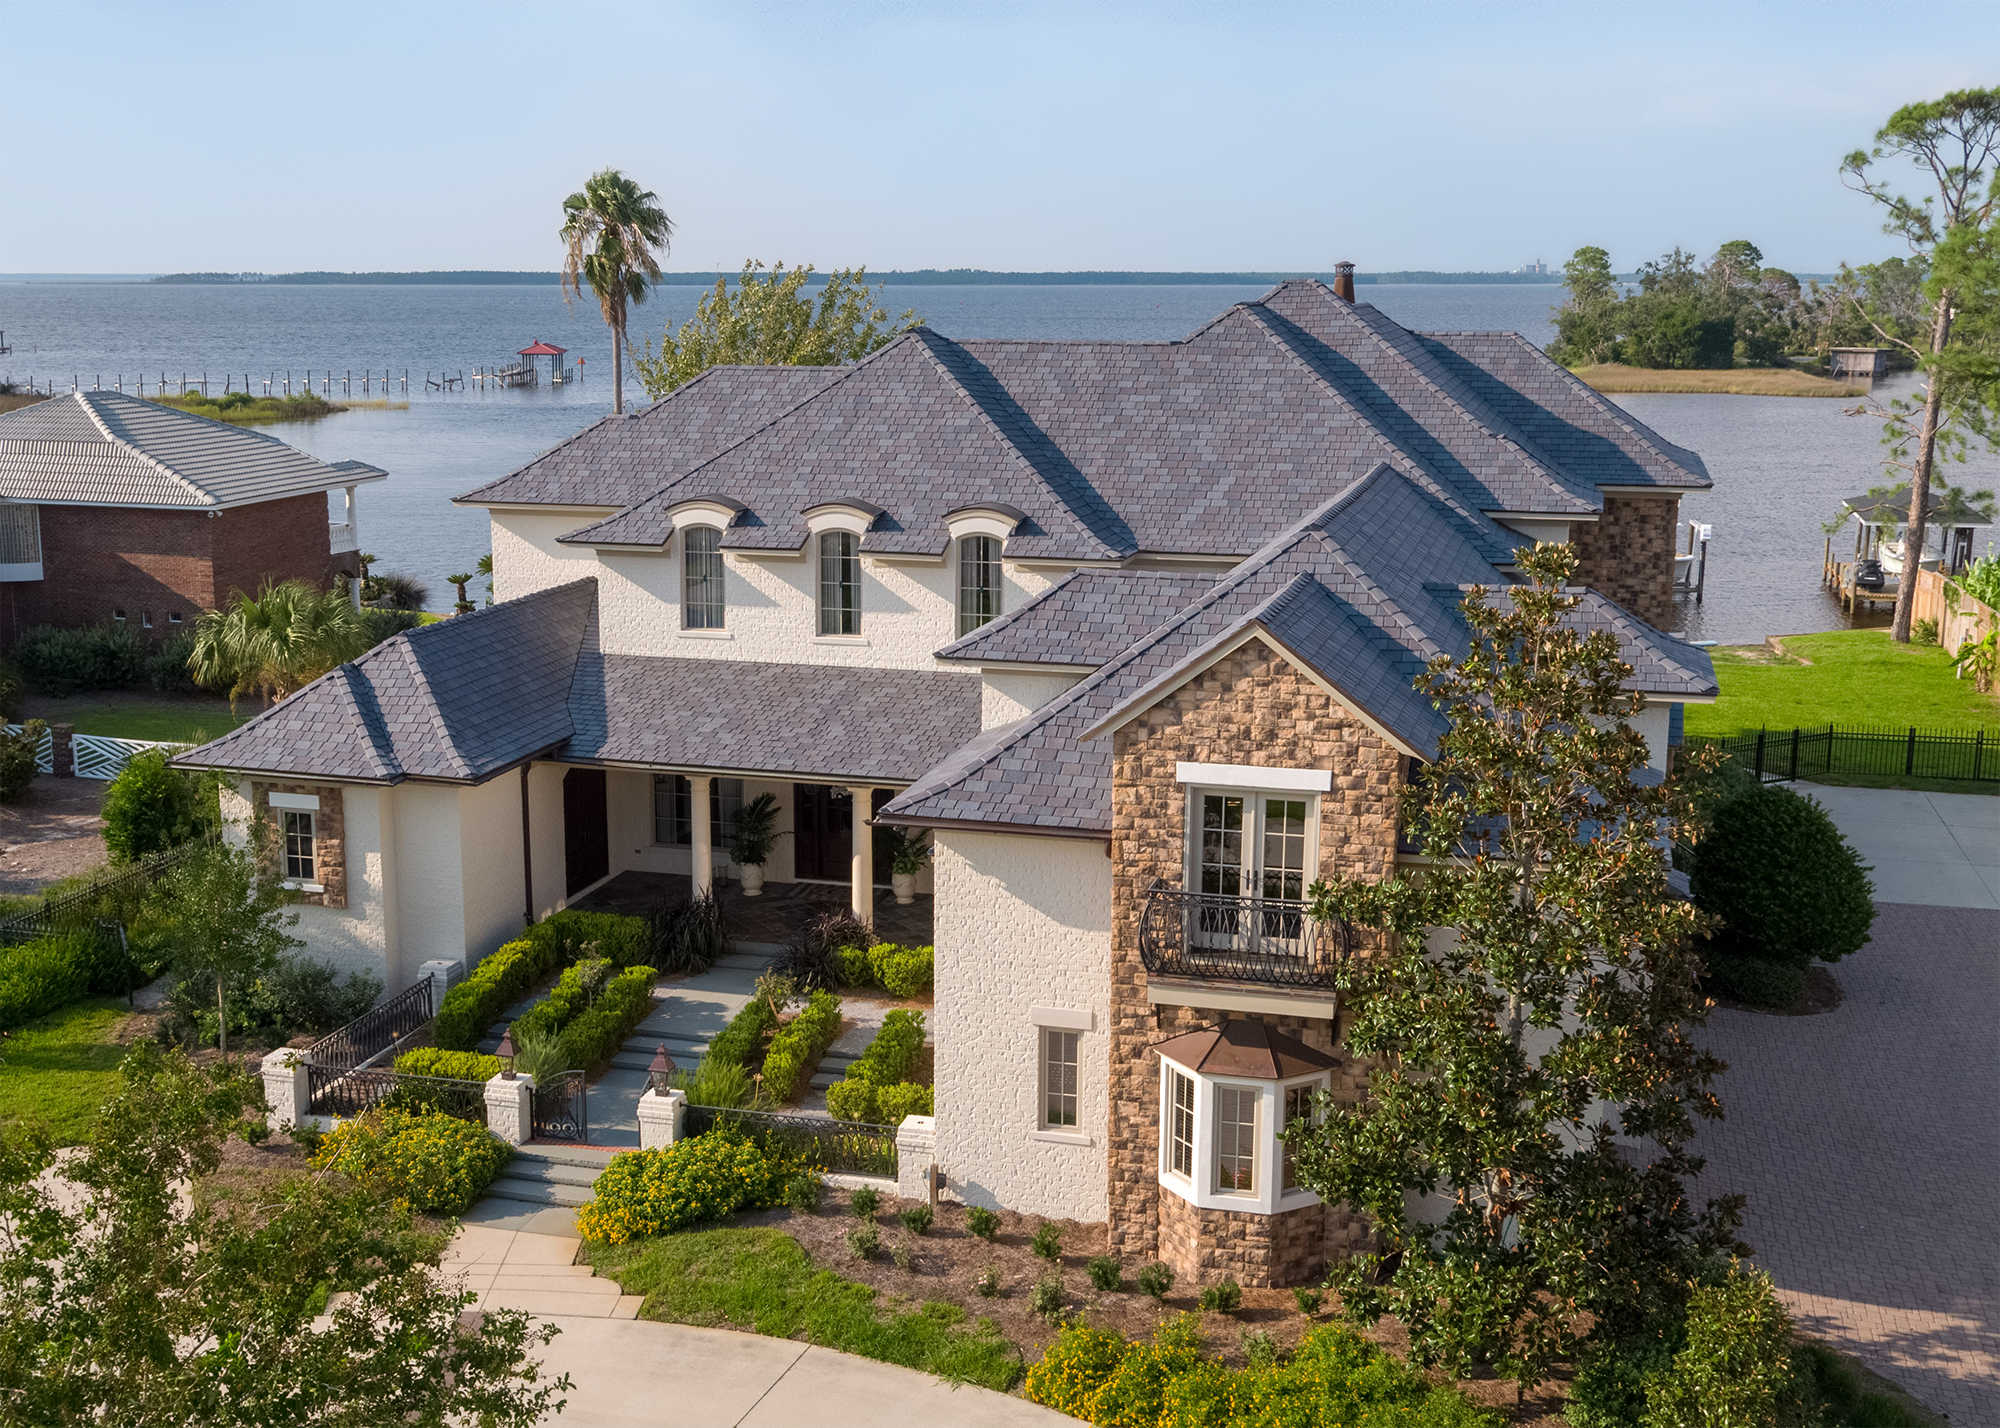 Westlake DaVinci Roofscapes’ Multi-Width Slate composite roofing on European-styled home